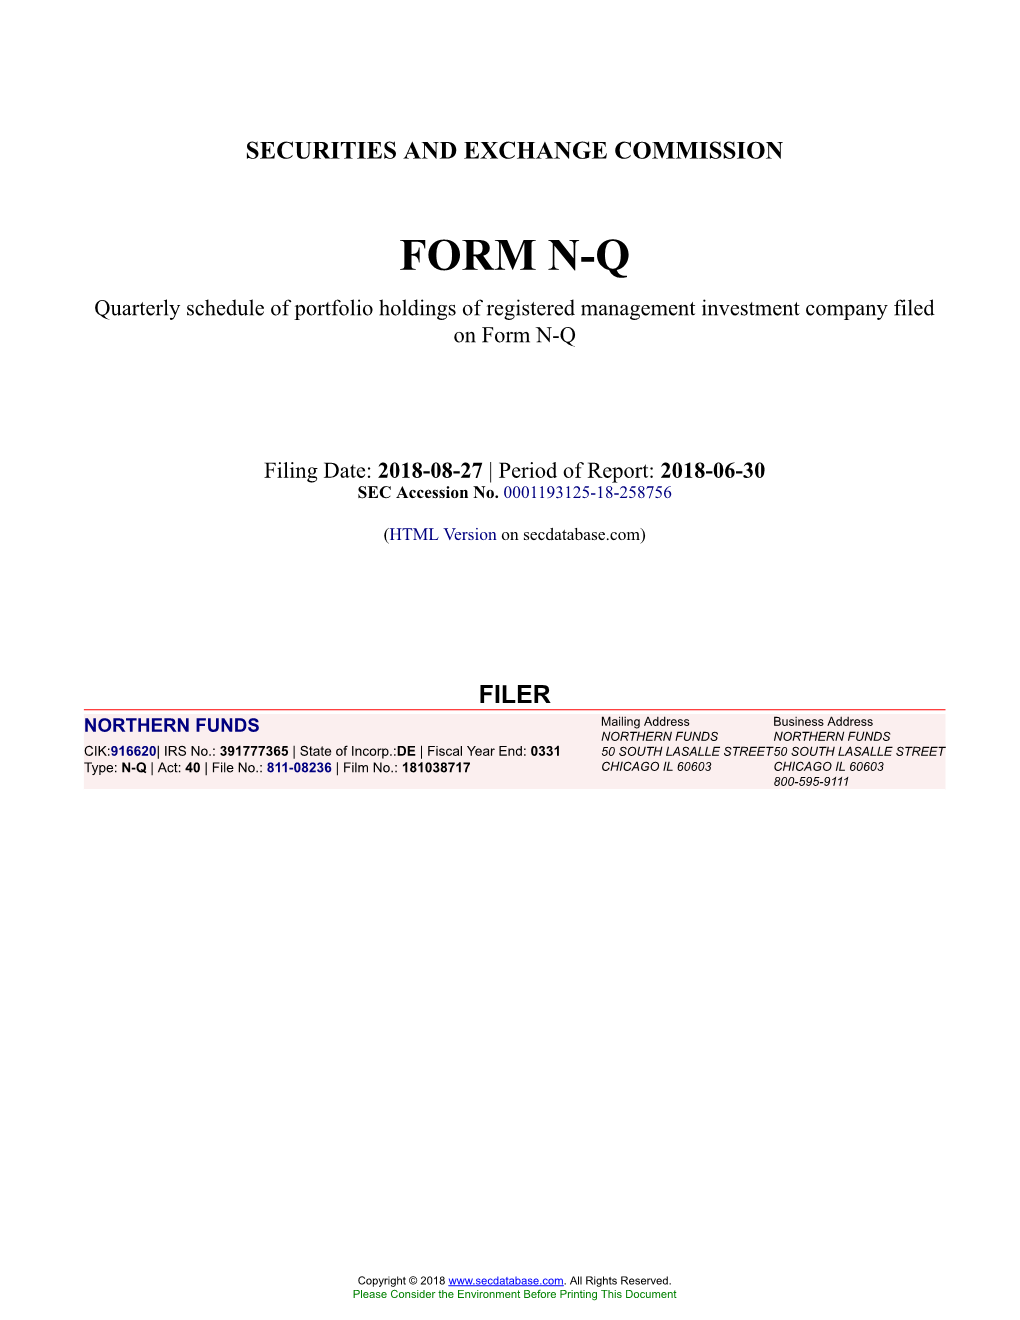 NORTHERN FUNDS Form N-Q Filed 2018-08-27